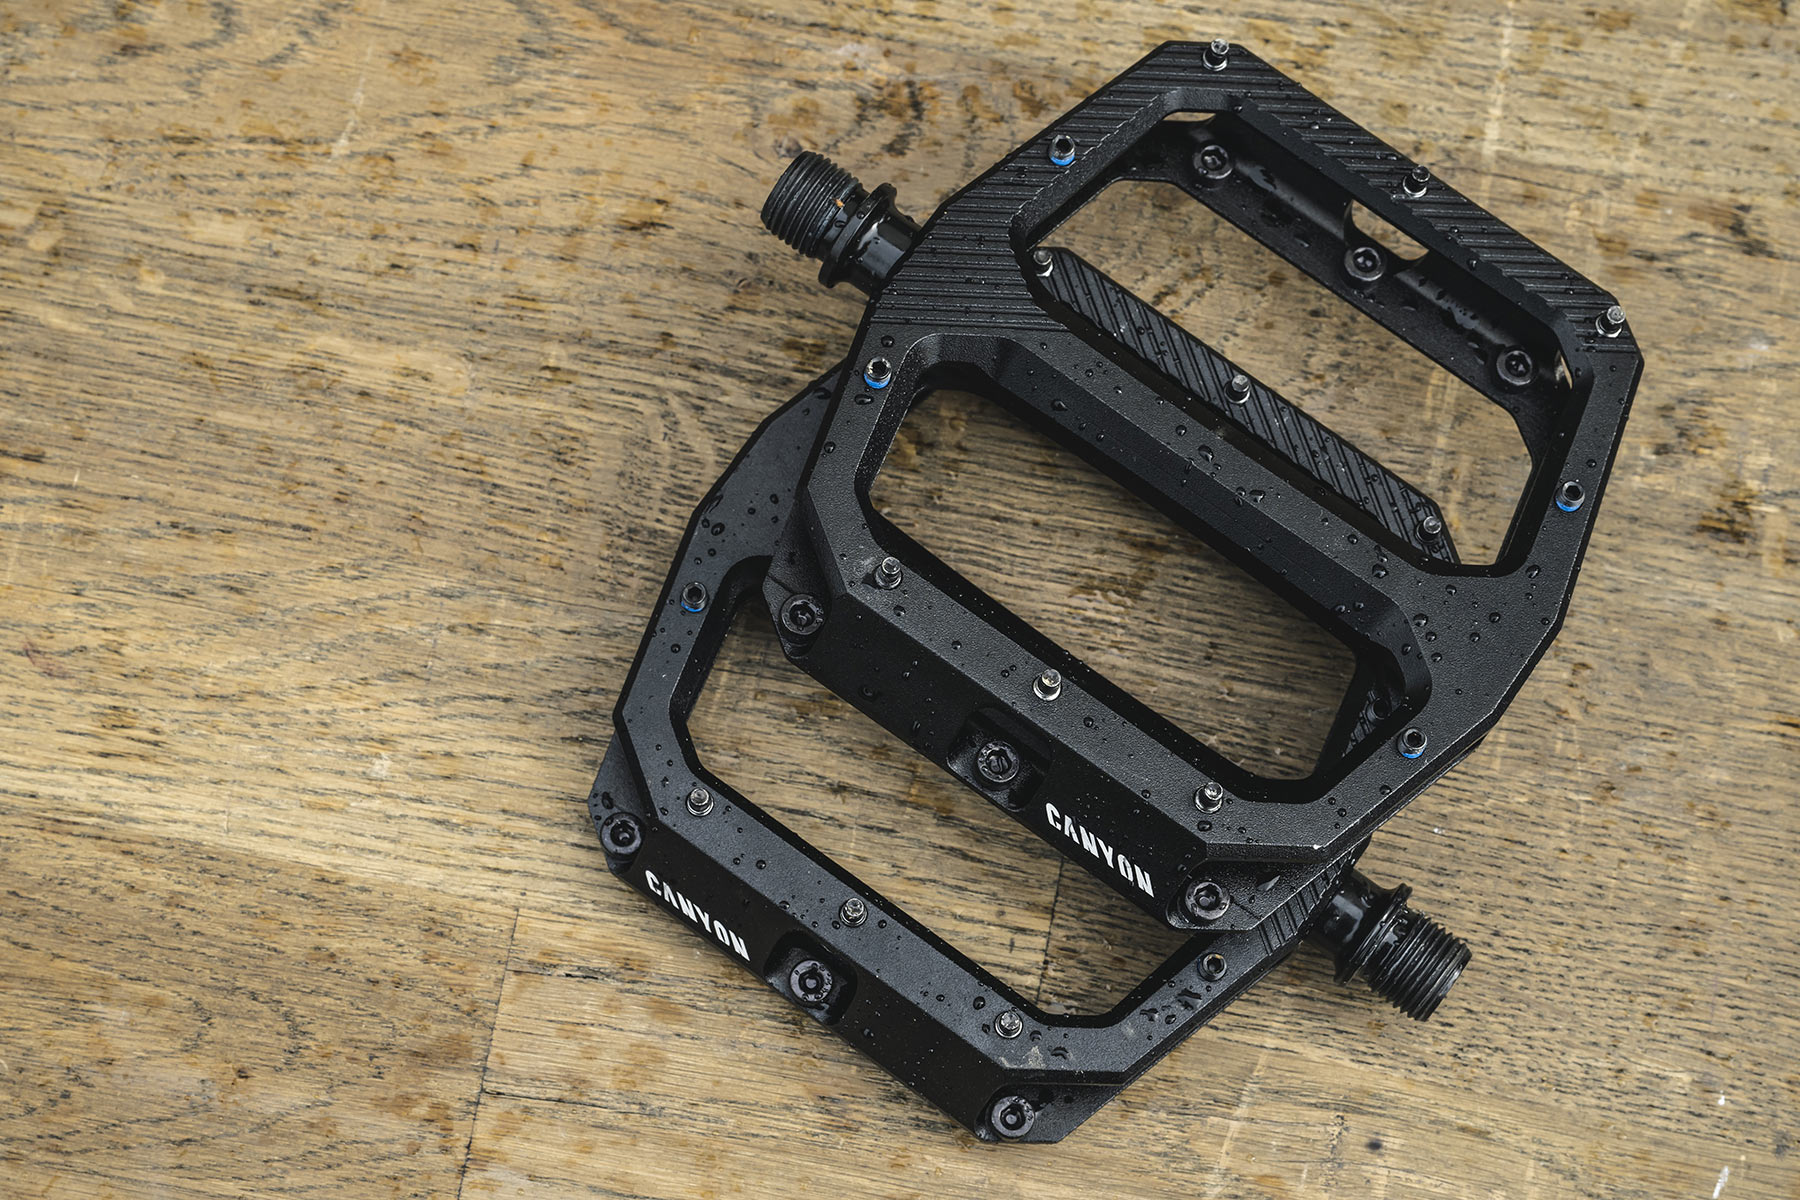 Canyon alloy MTB Performance Flat Pedals, photo by Roo Fowler, in black too